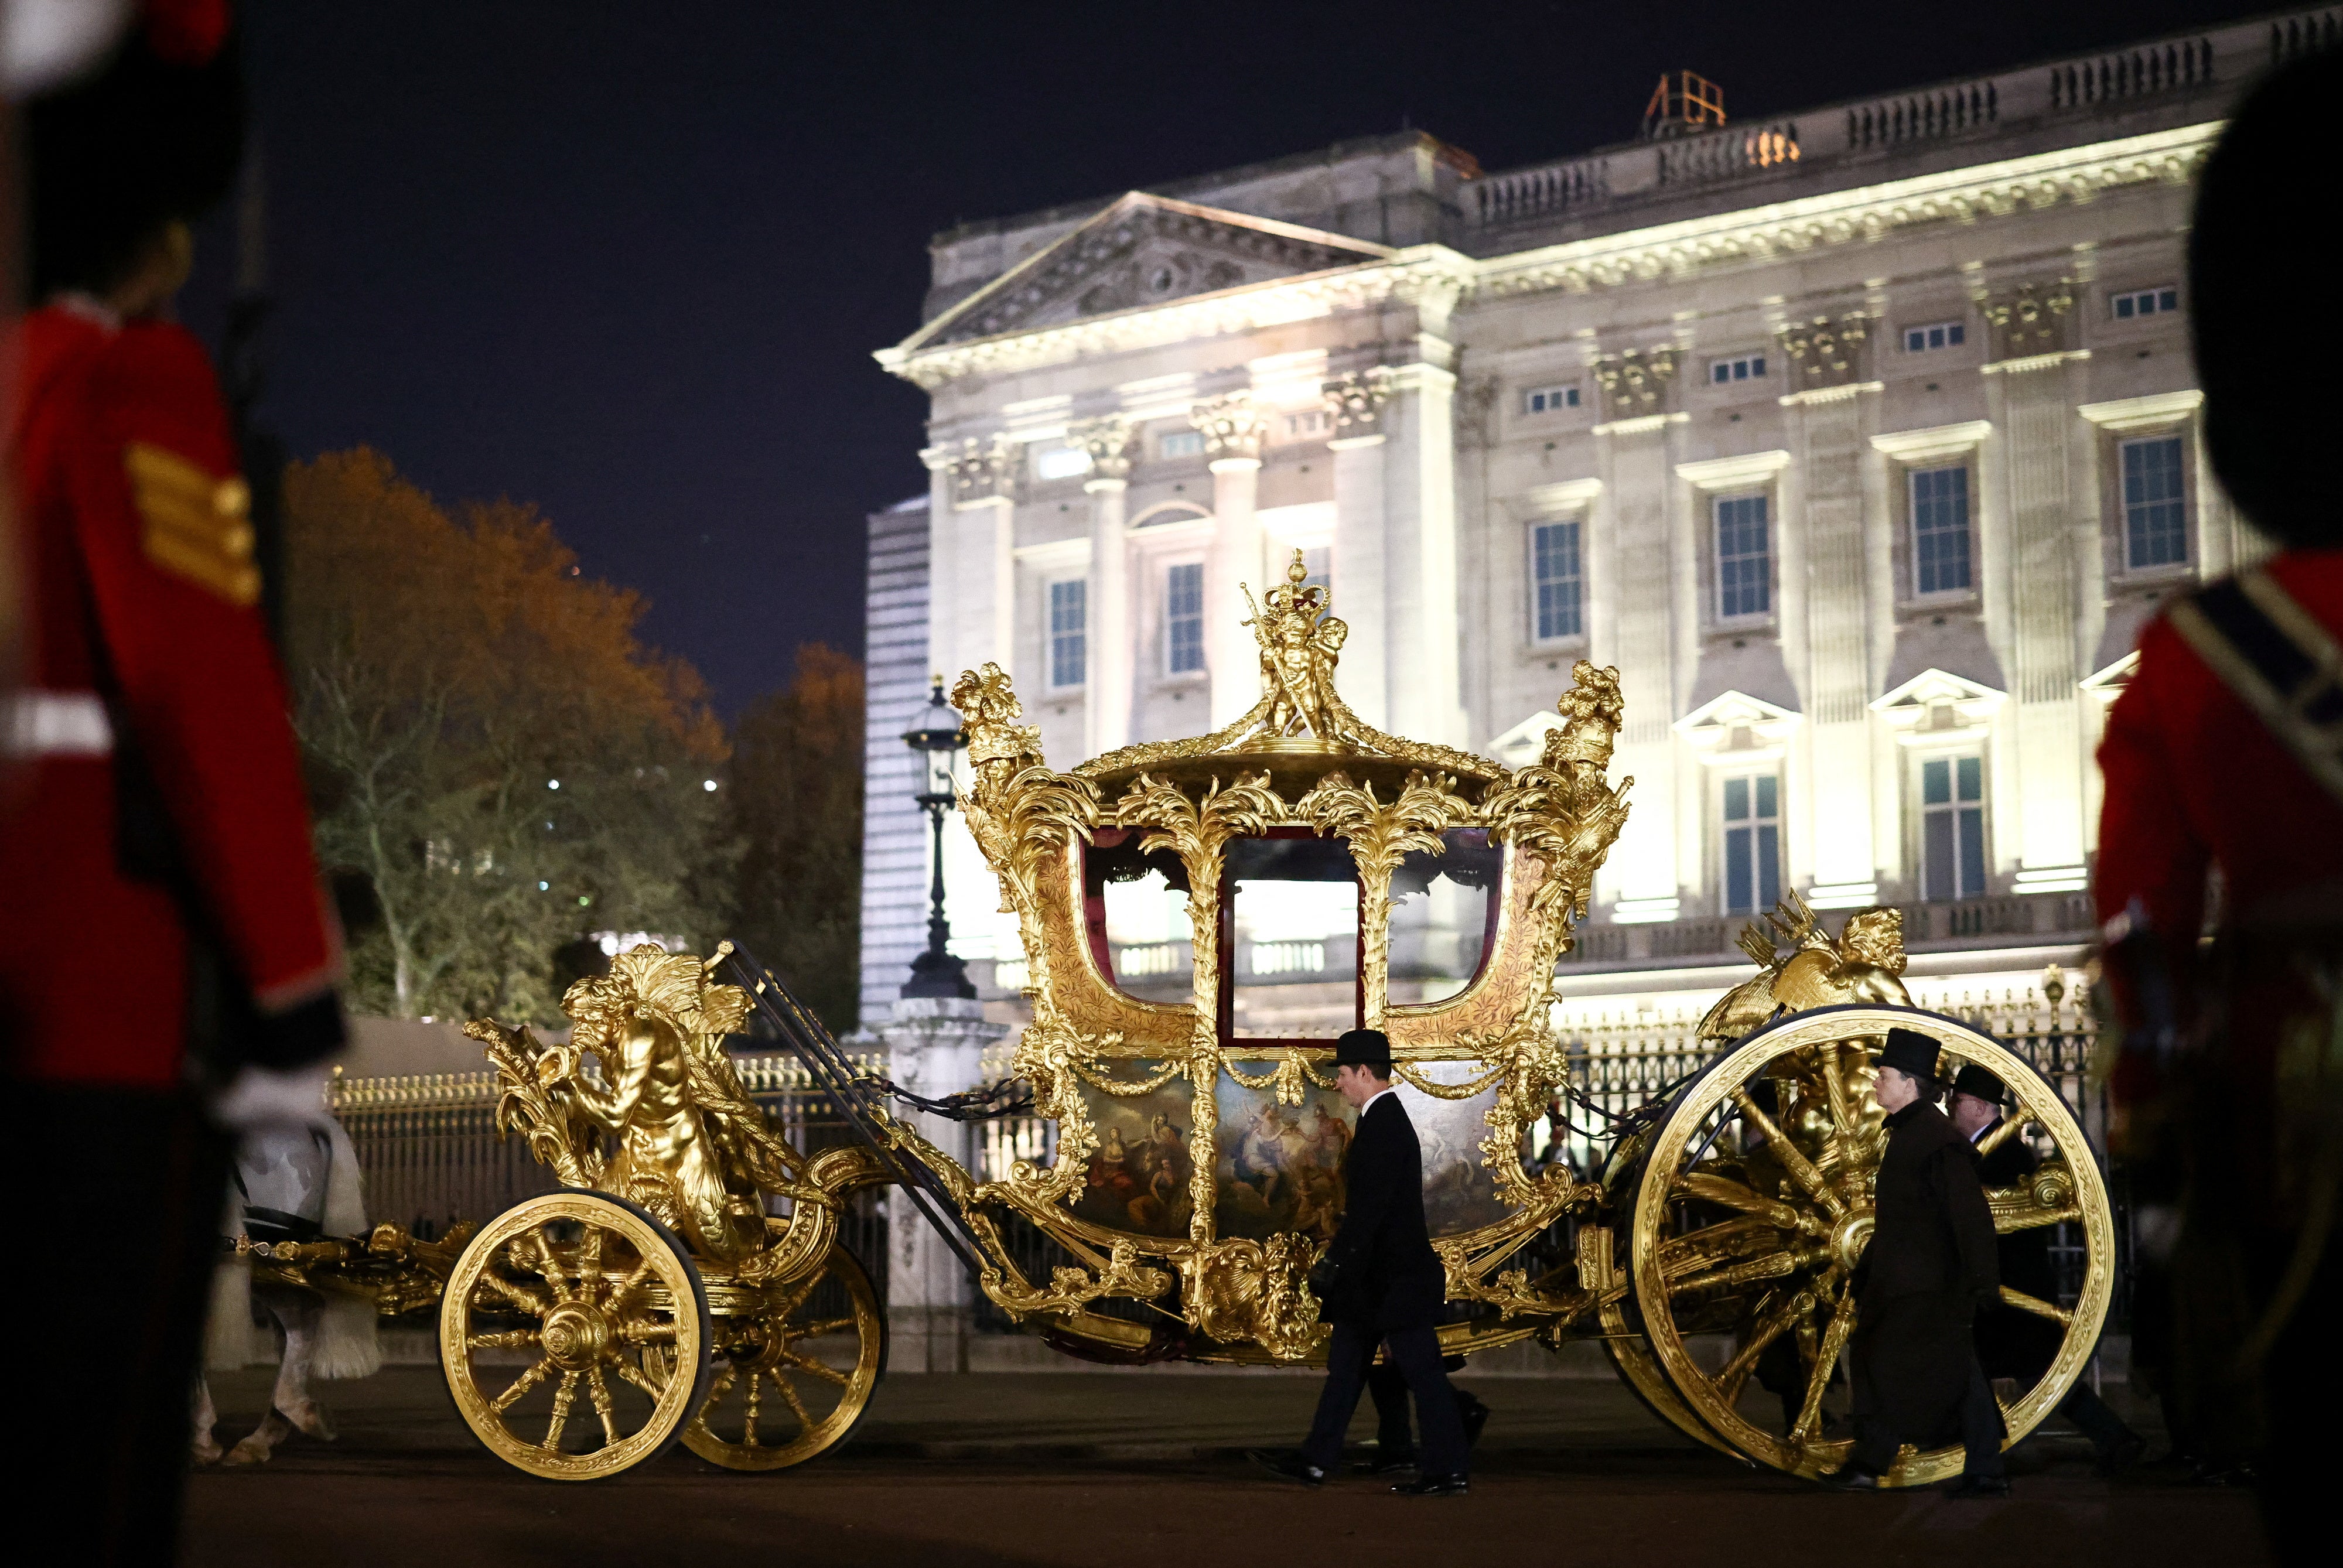 The Gold State Coach is ridden alongside members of the military during a full overnight dress rehearsal of the coronation